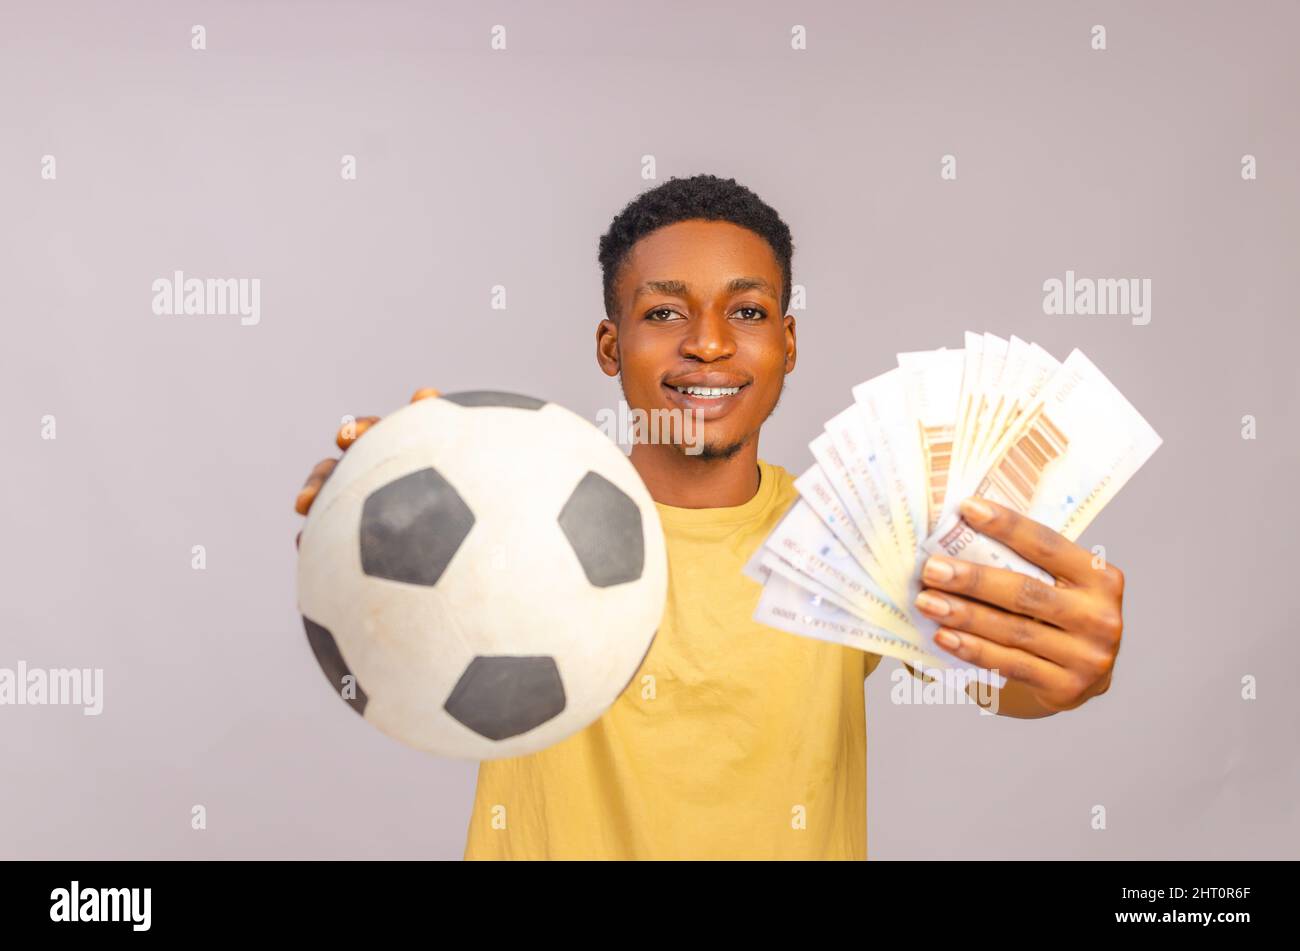 Sport bet excitement, gambing and family lifestyle concept. Excited african-american young guy enjoying their win, standing with soccer ball and lots Stock Photo